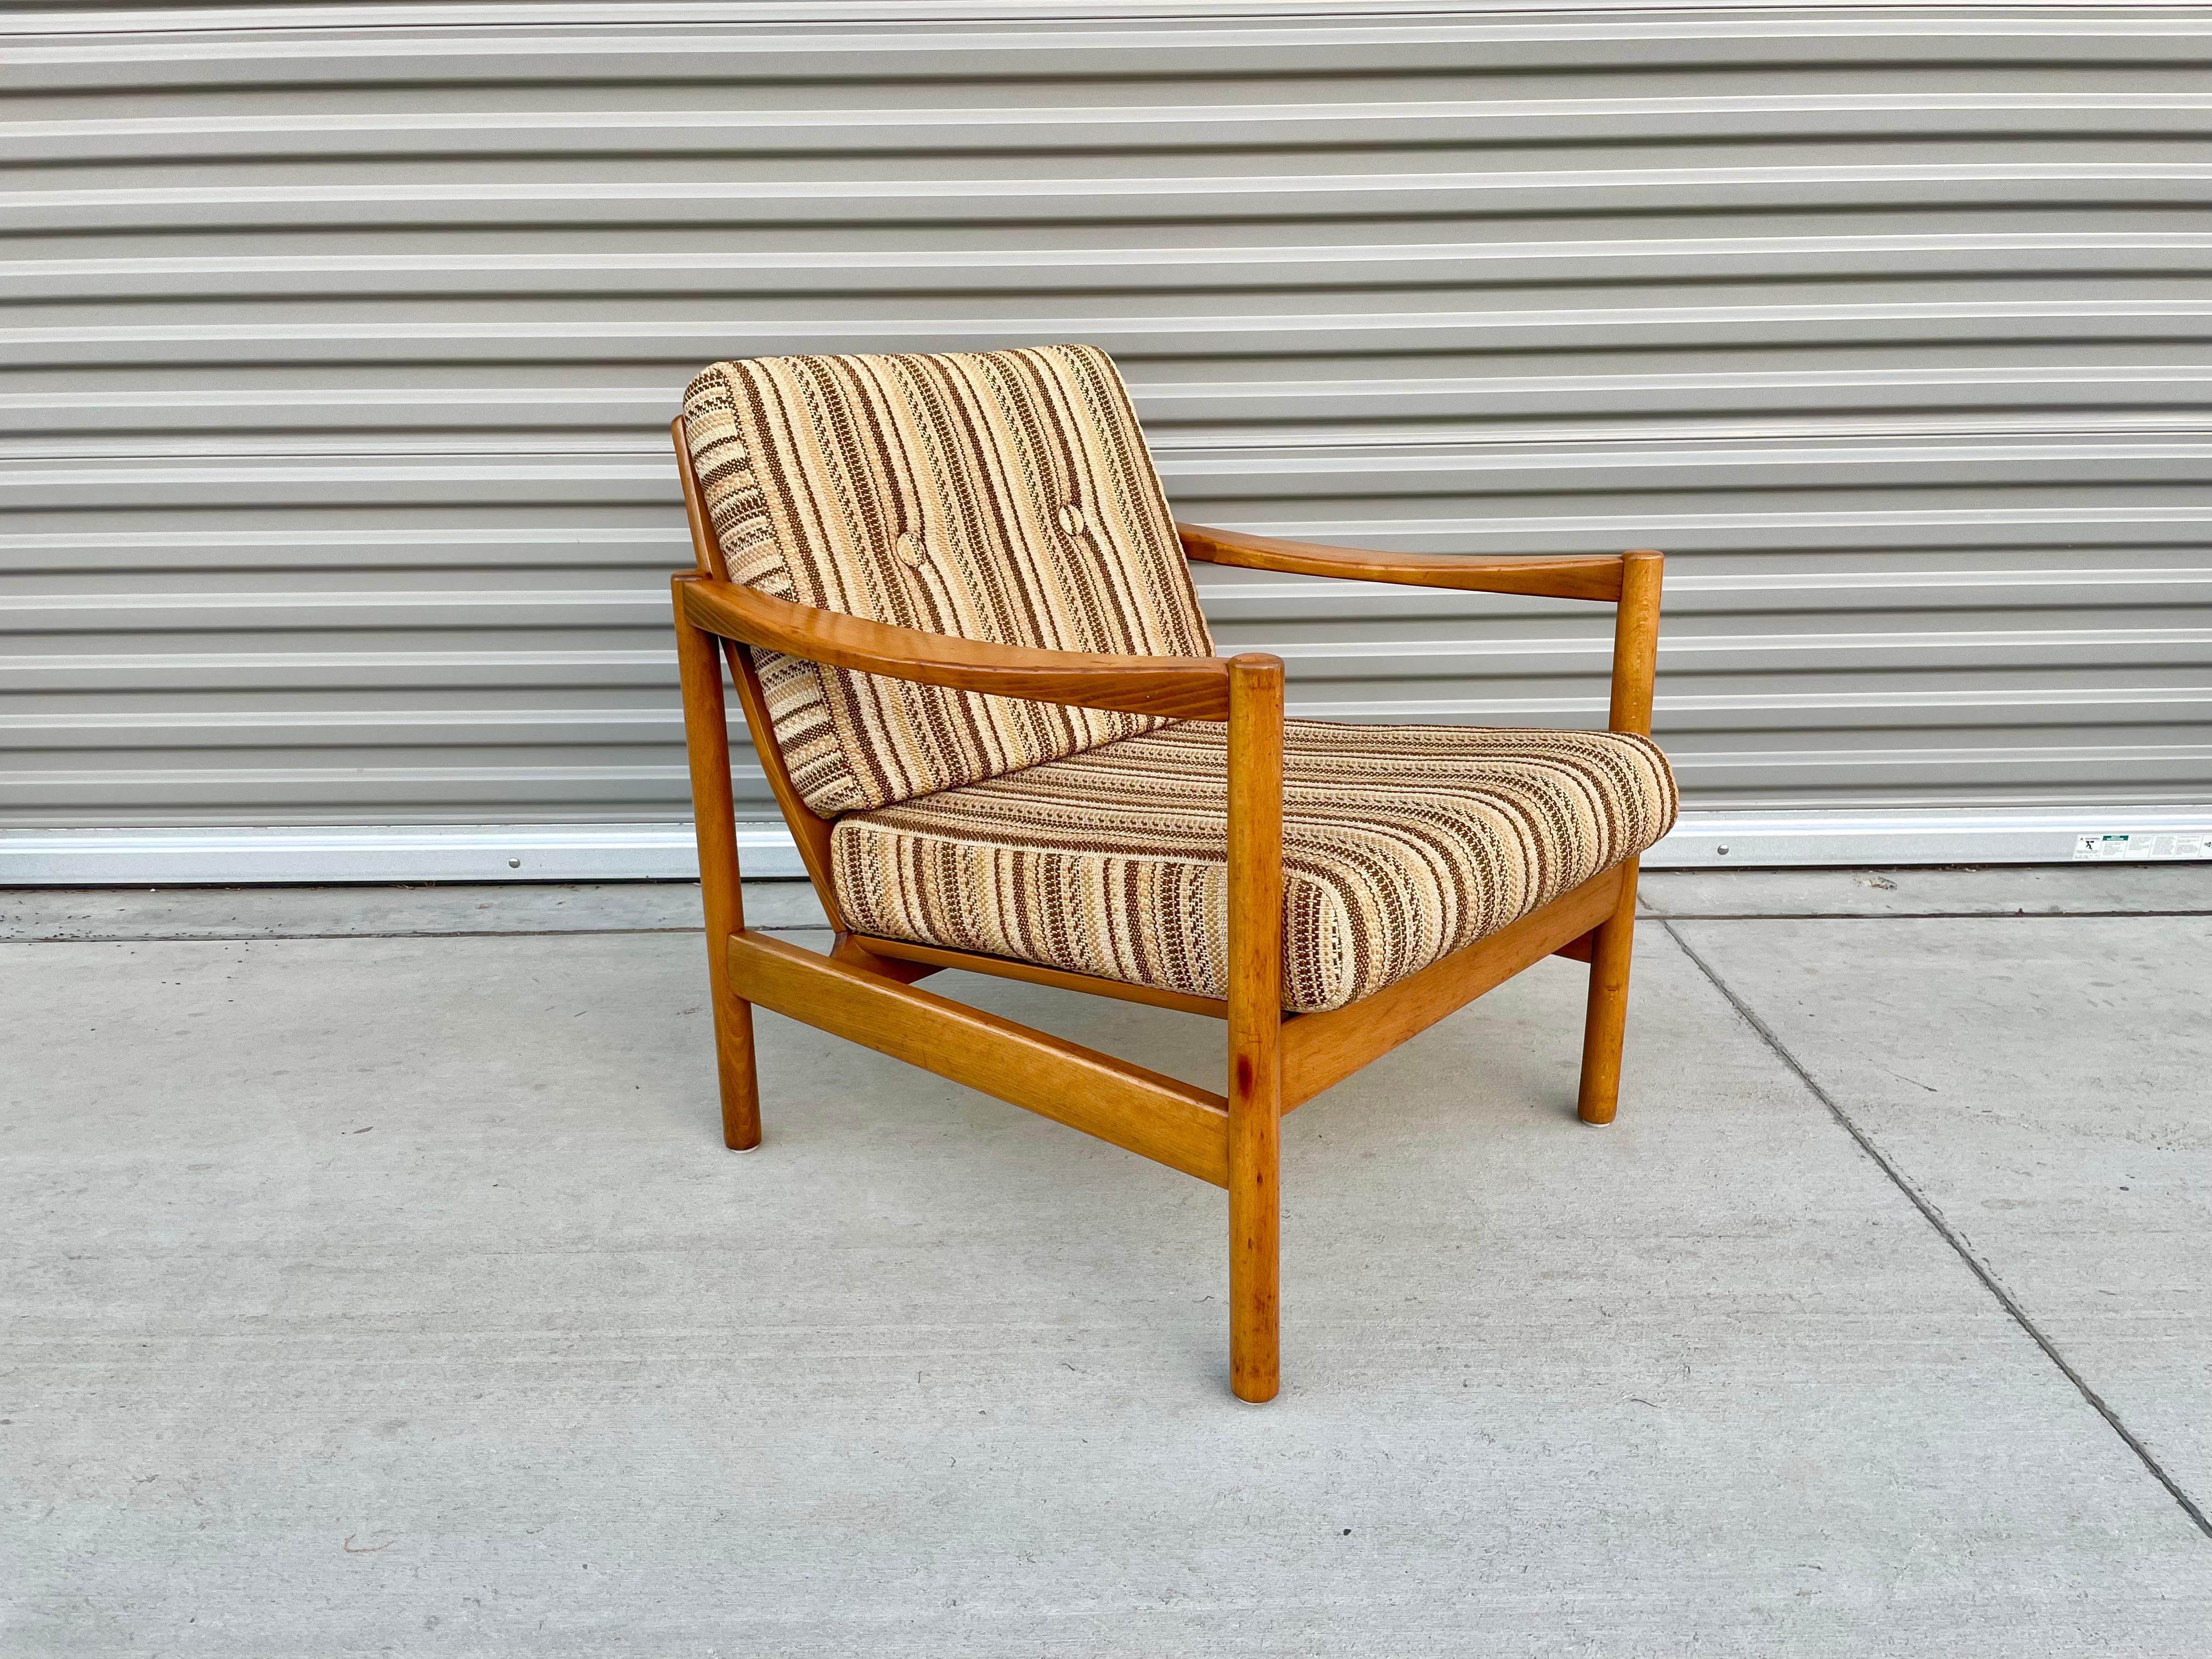 Vintage Teak Lounge Chair In Good Condition For Sale In North Hollywood, CA